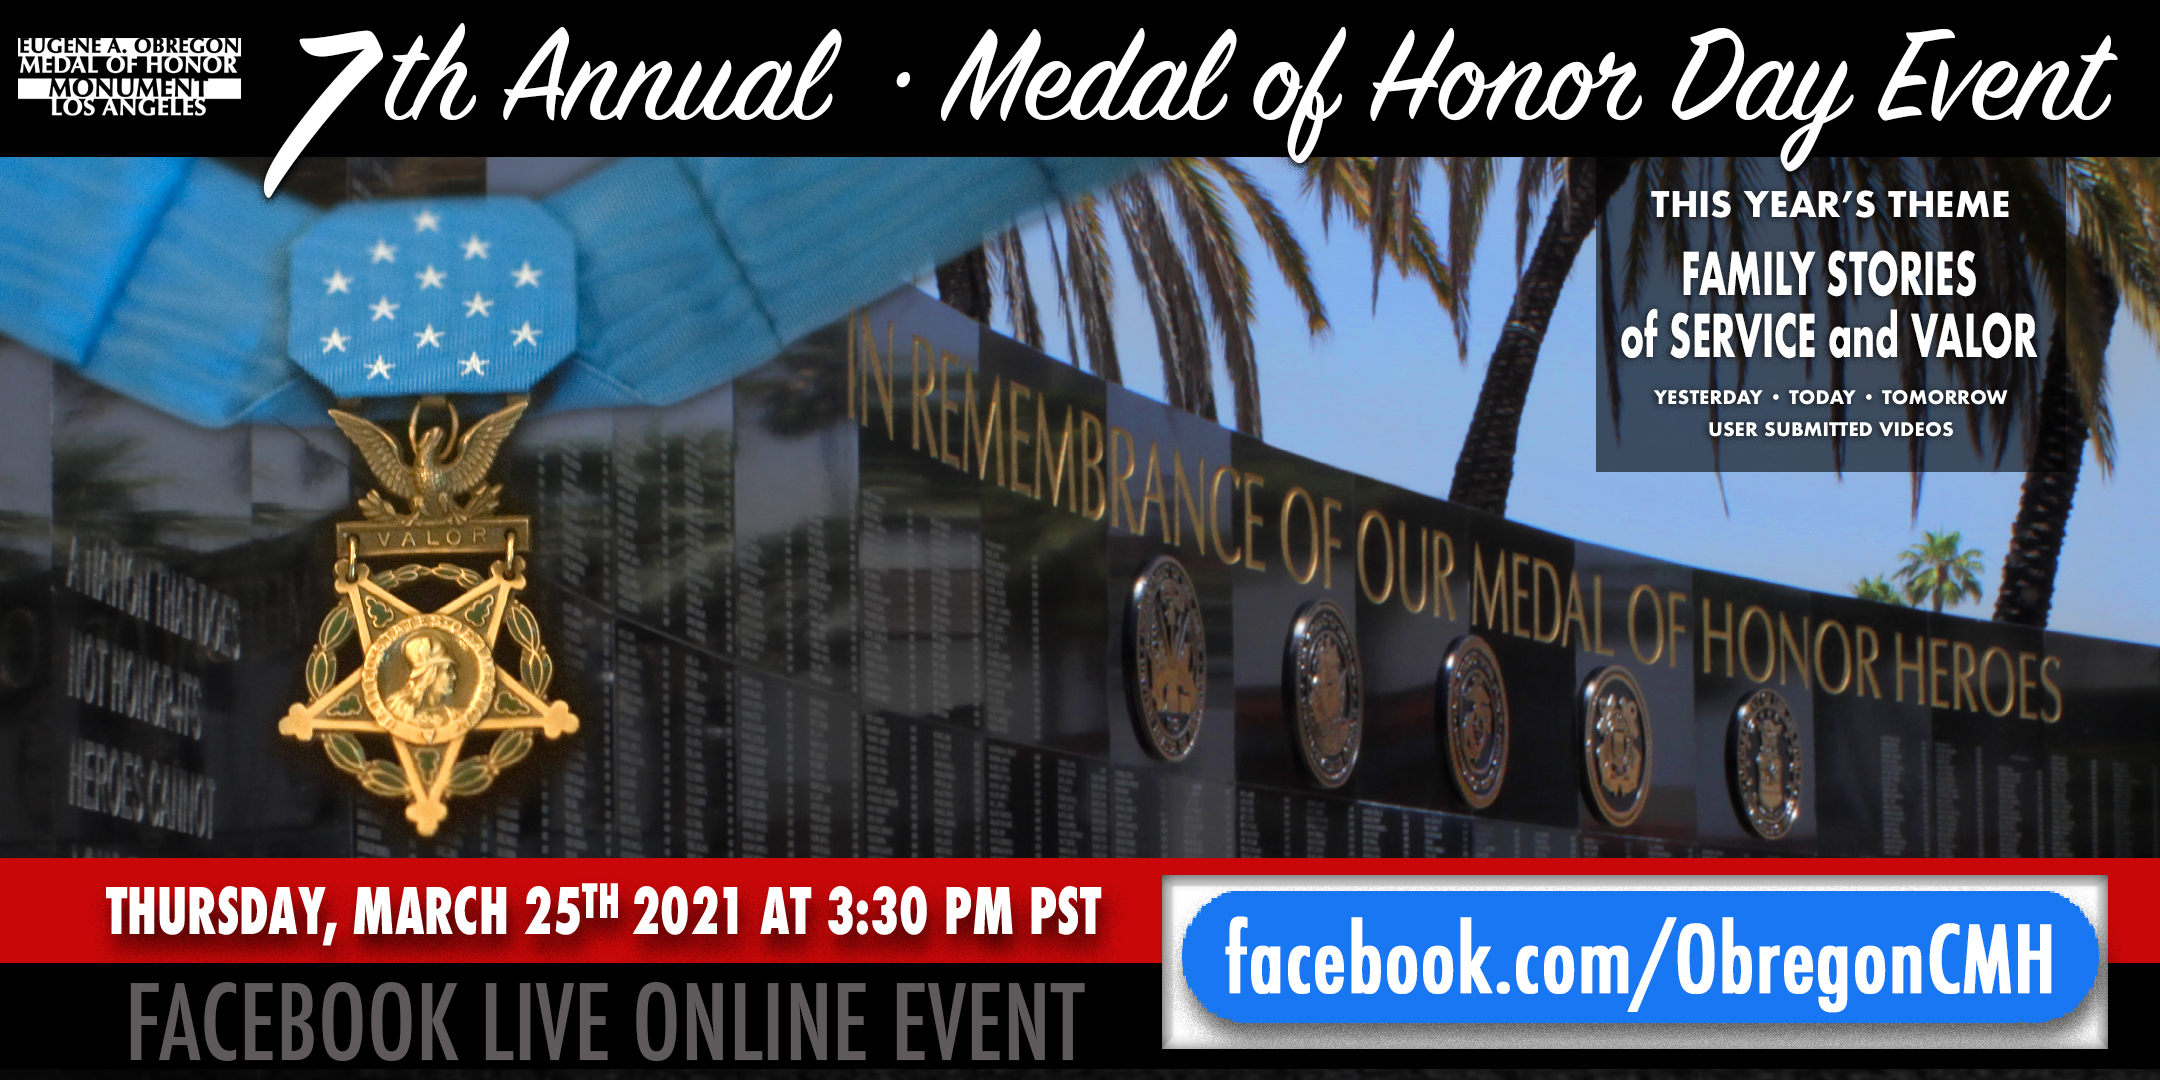 medal of honor day event